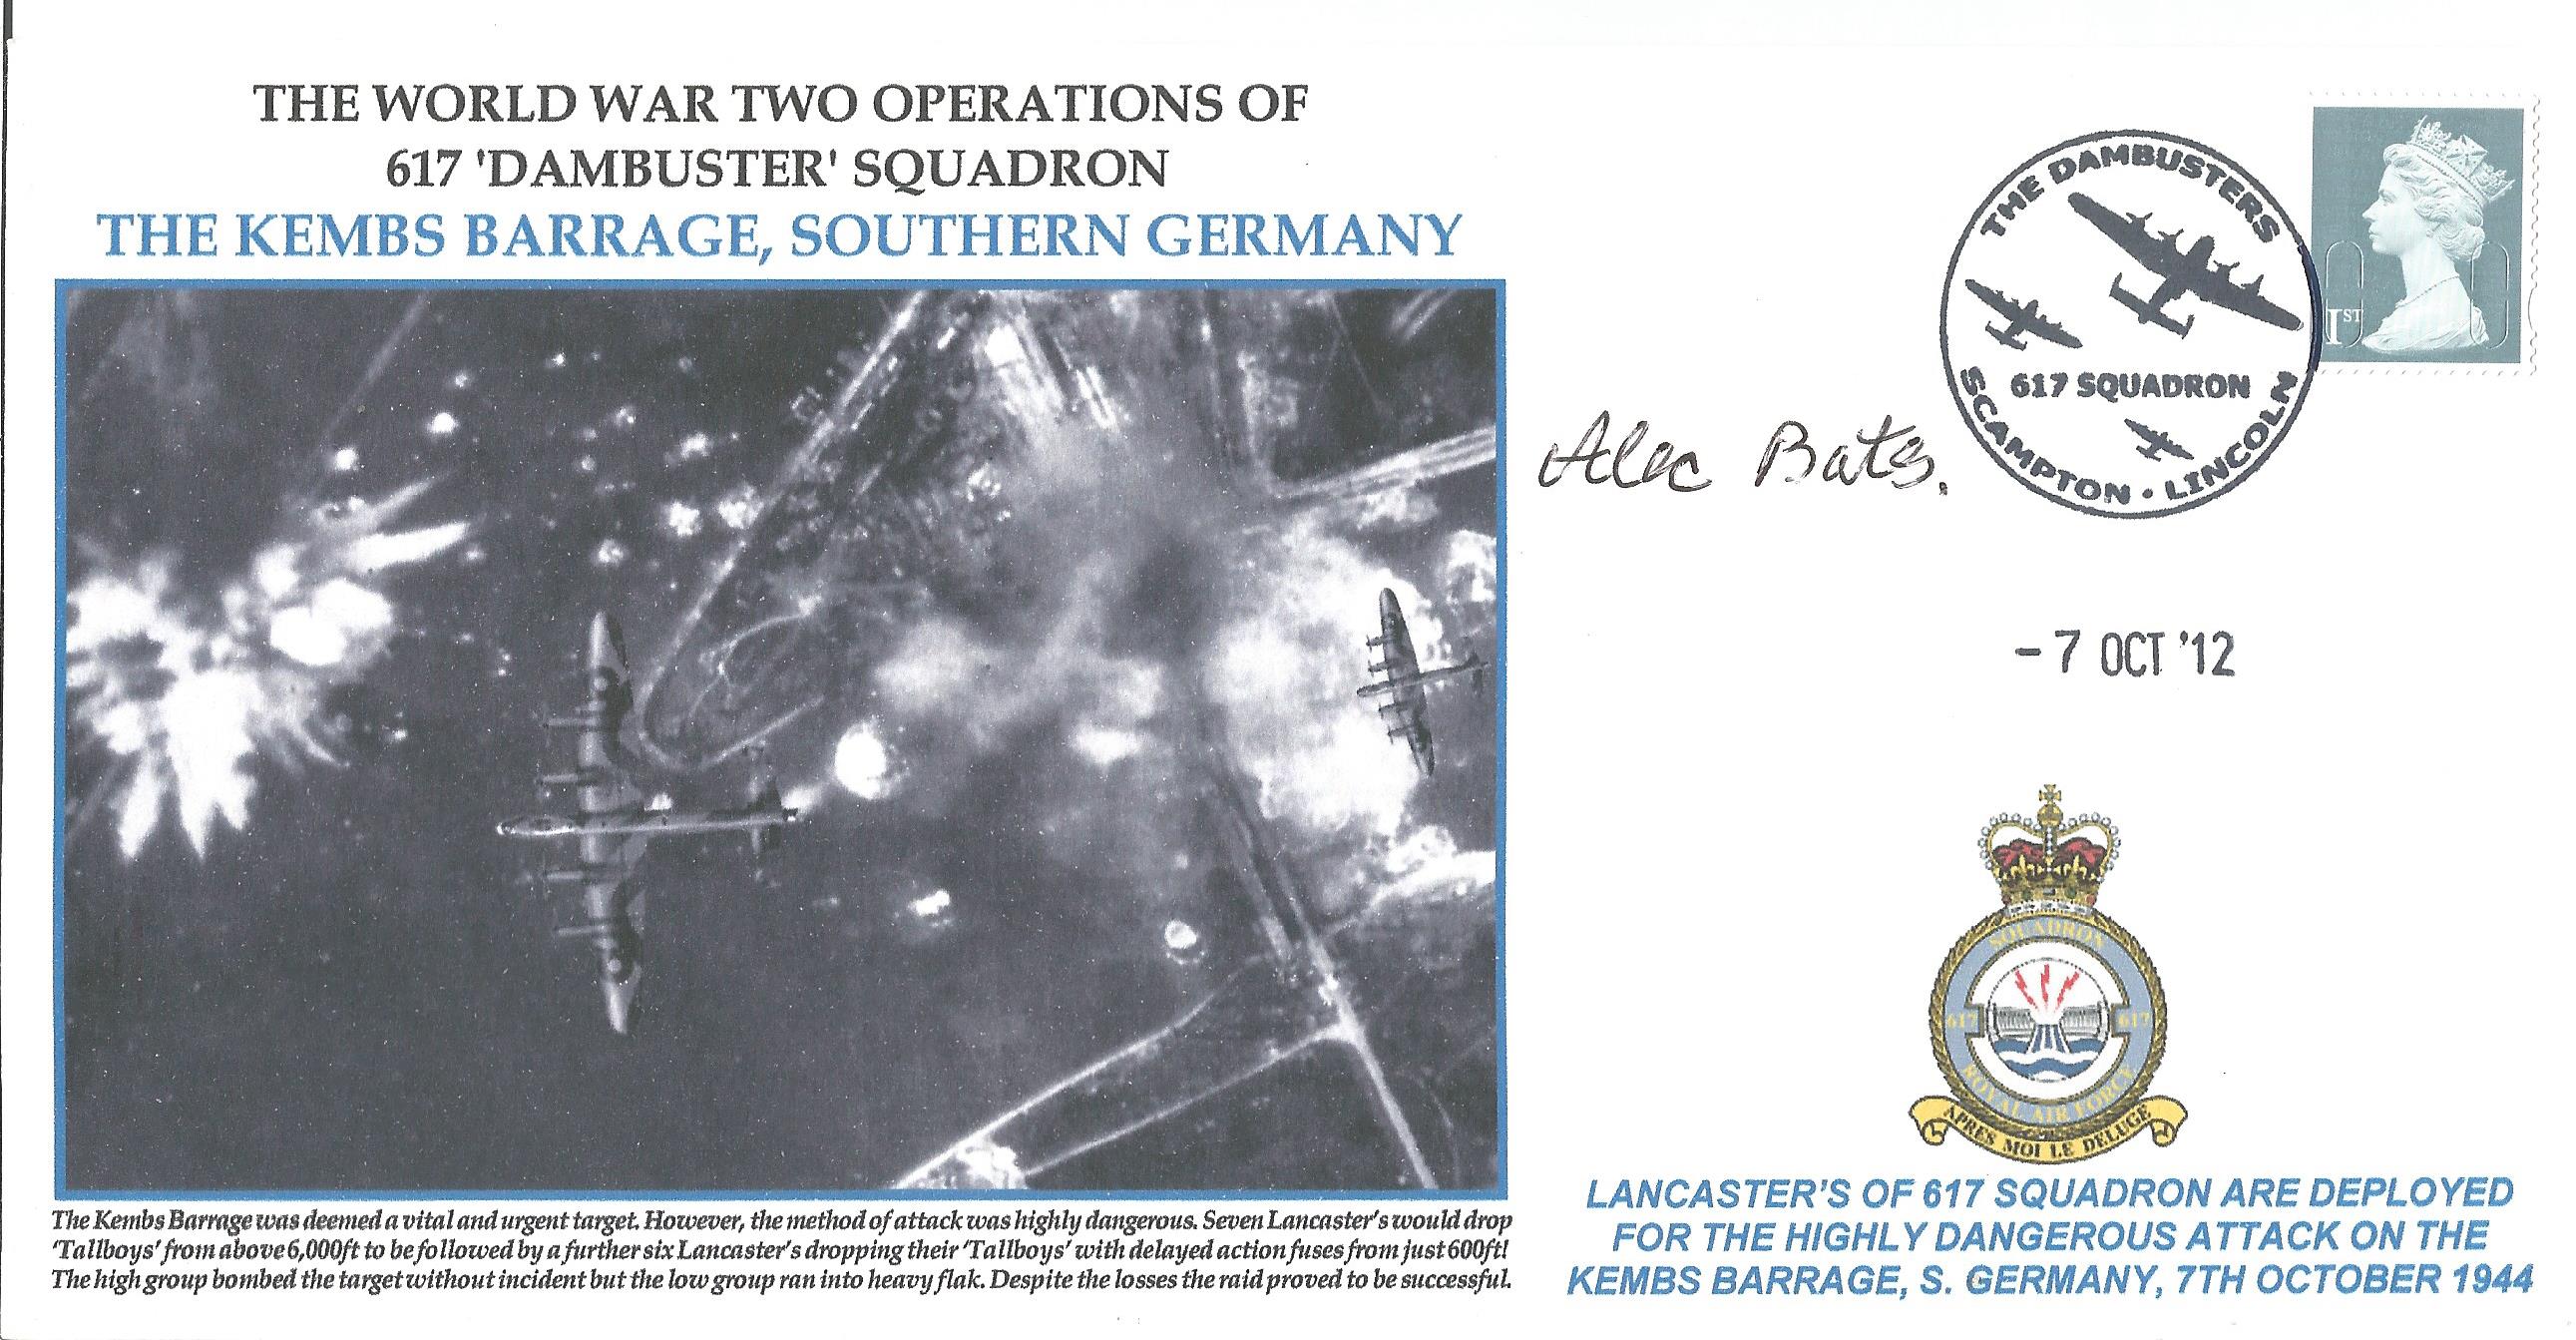 W Off. Alec Bates W Op. 617 Sqn. signed Series cover for the World War Two Operations of 617